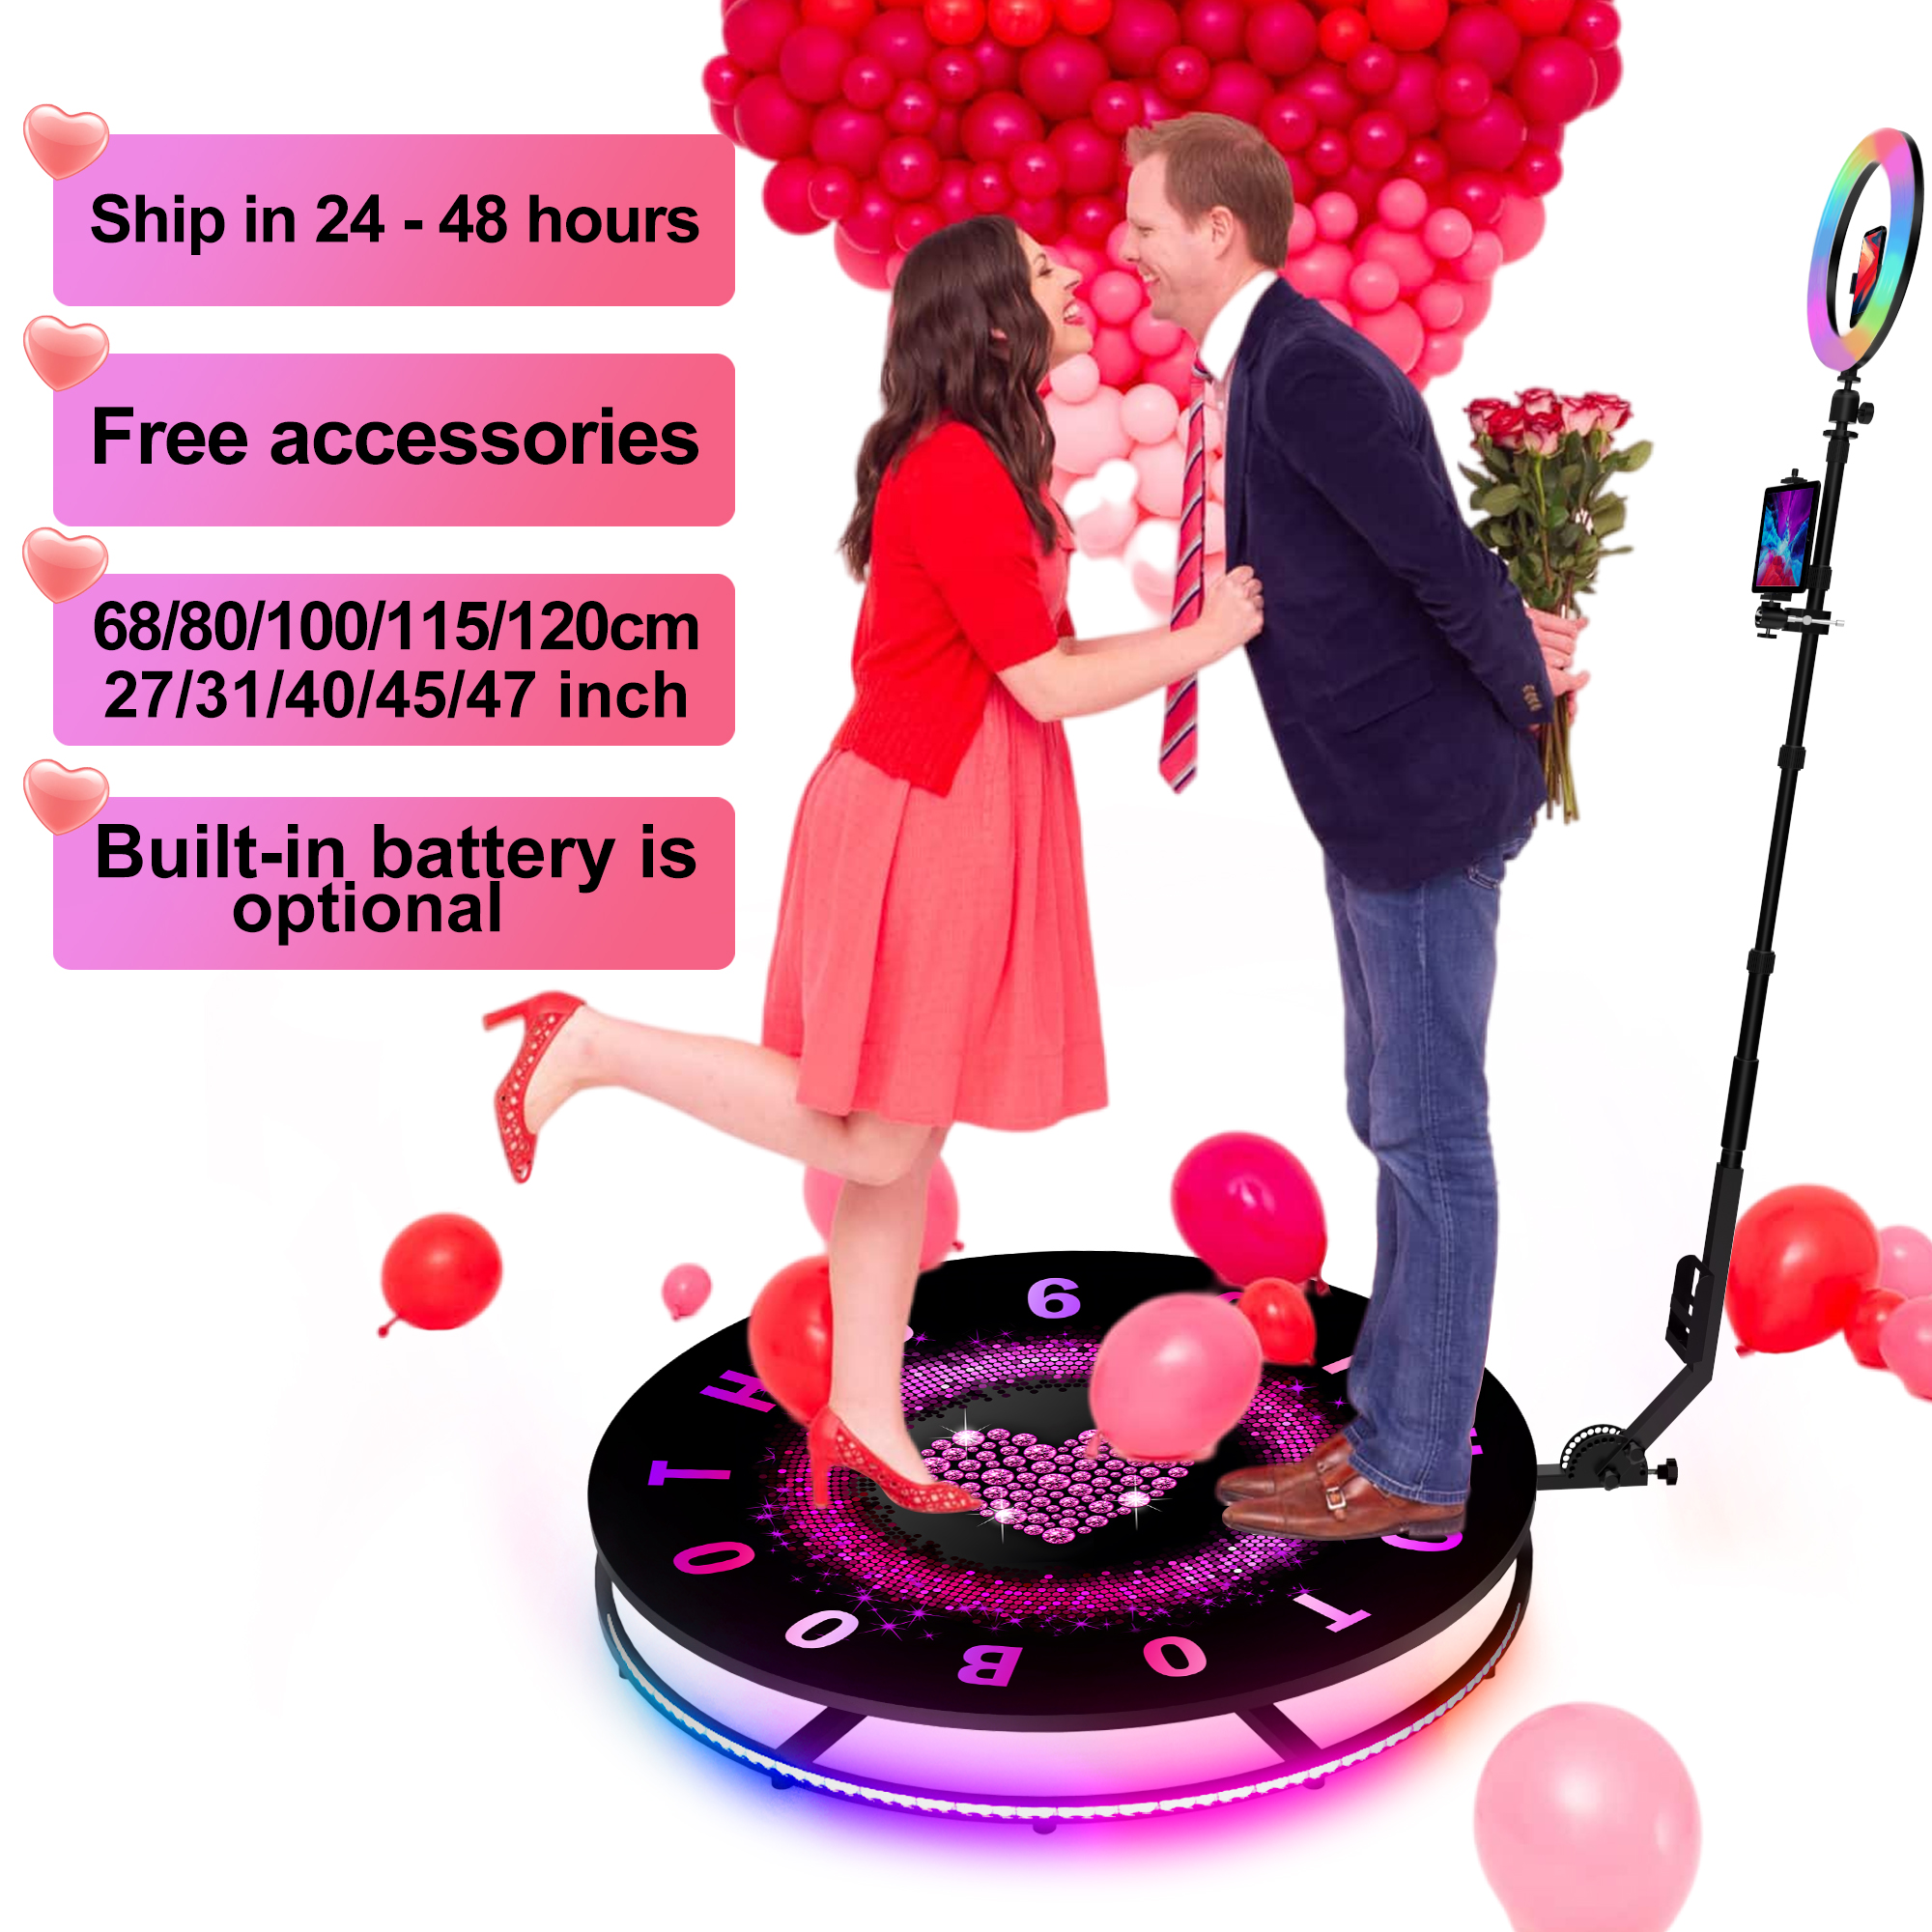 Hot sale spincam 360 degree photo video booth Featured Image